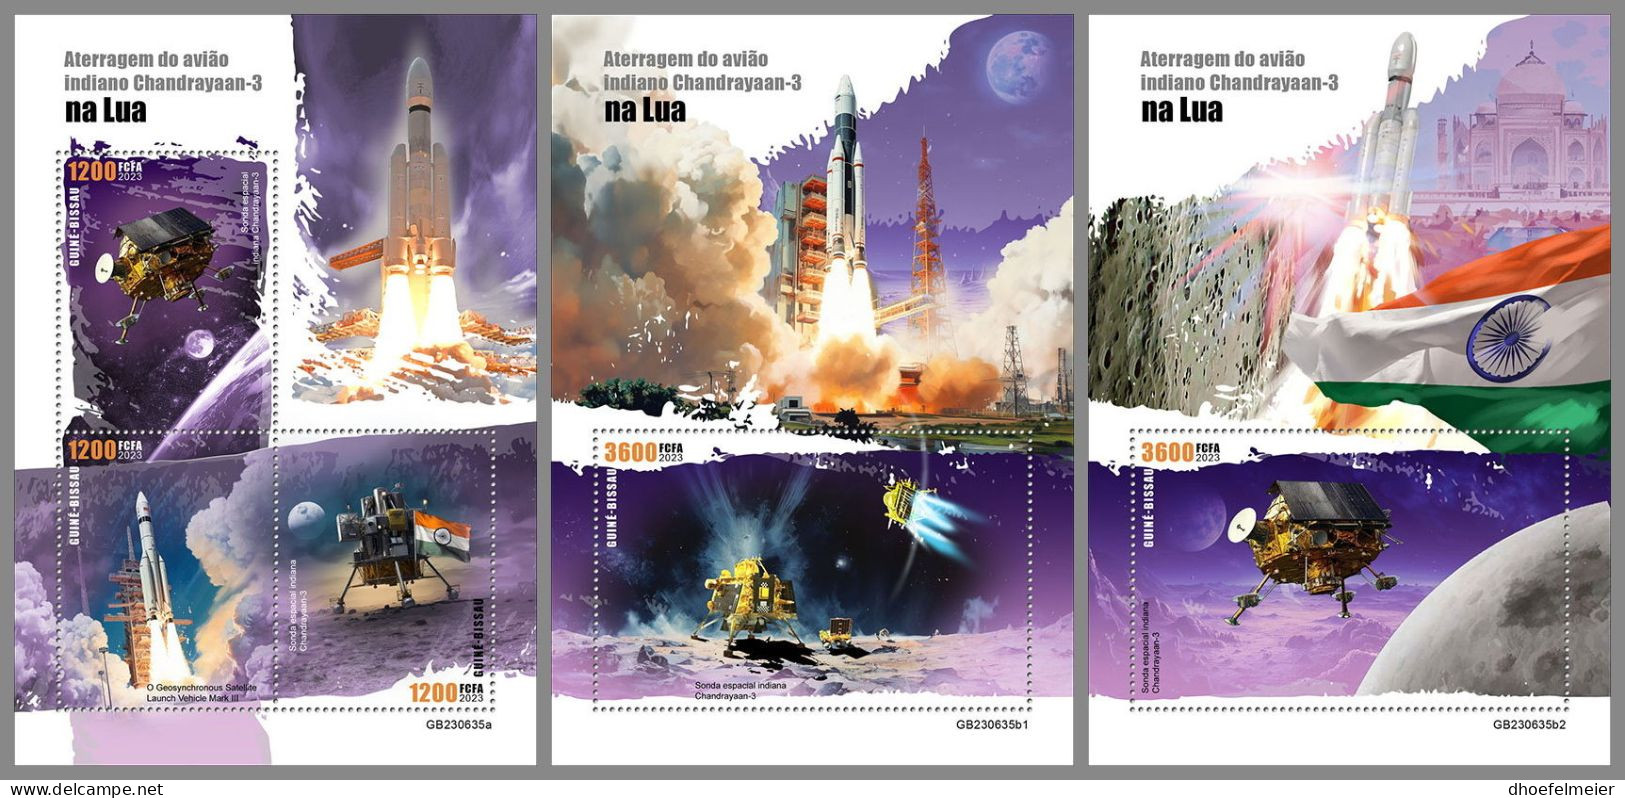 GUINEA-BISSAU 2023 MNH Indian Chandrayaan-3 Space Raumfahrt M/S+2S/S – IMPERFORATED – DHQ2420 - Afrika